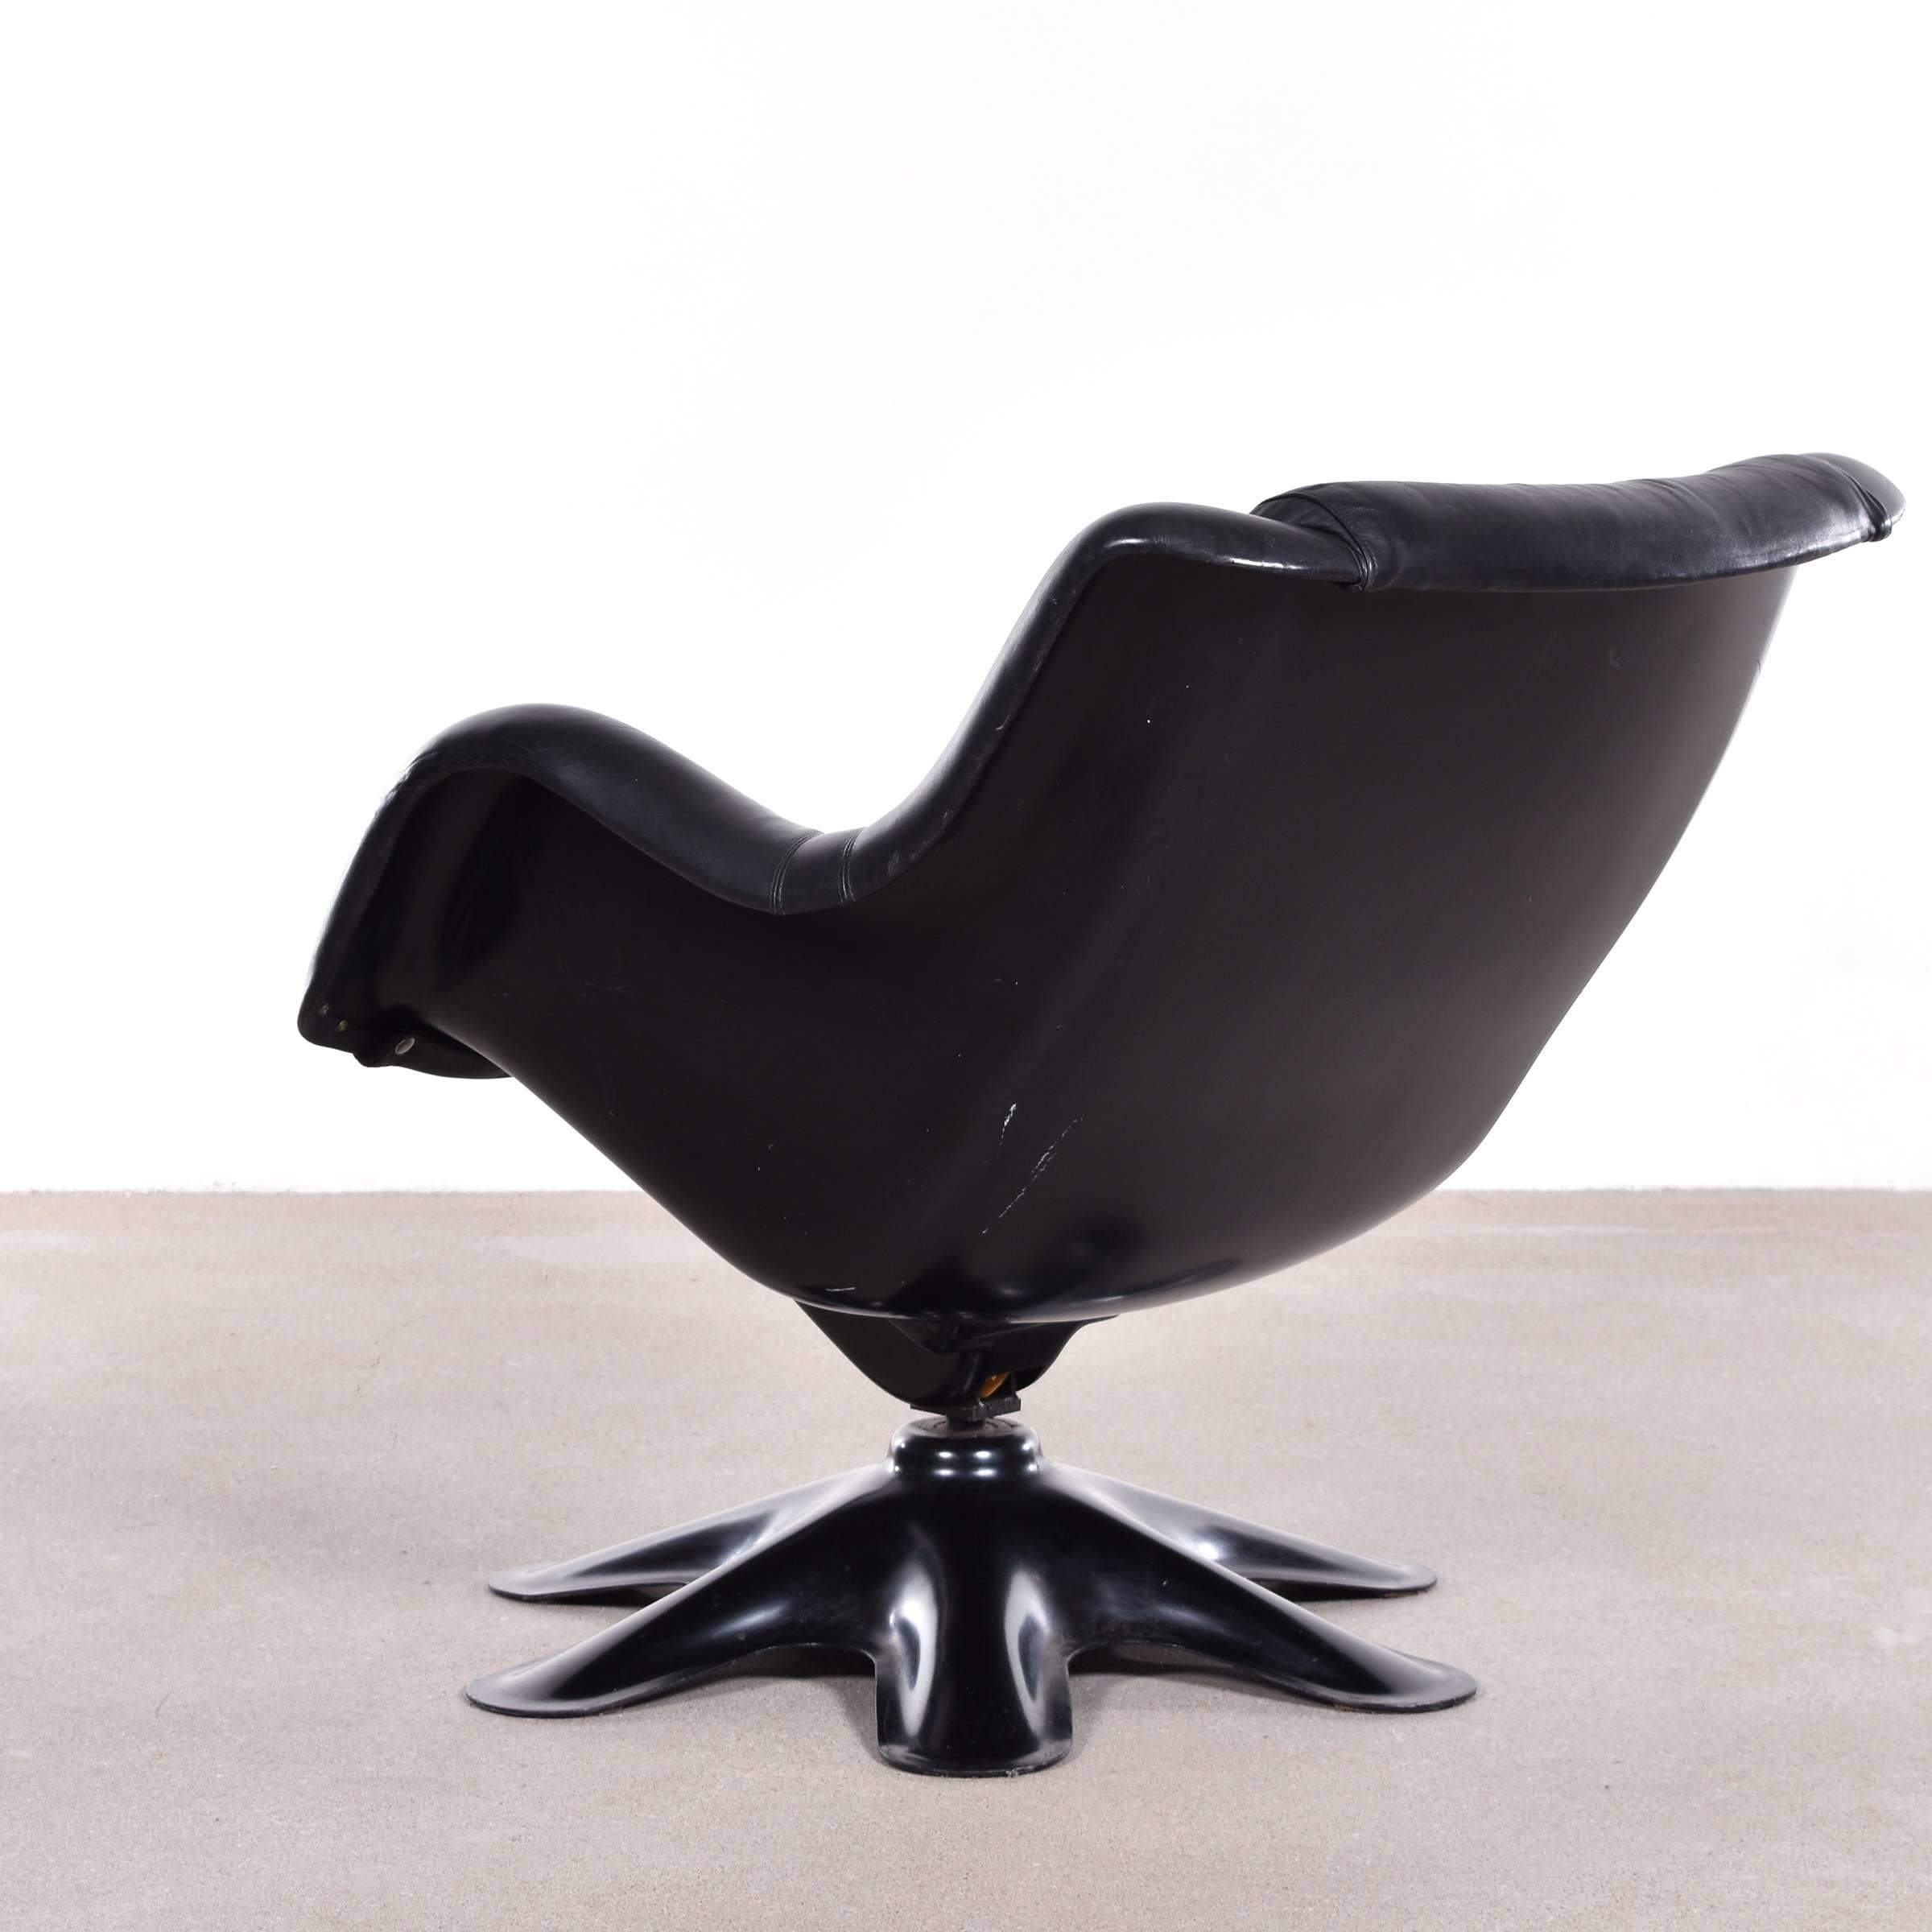 Rare lounge chair by Yrjö Kukkapuro. Black fiberglass shell and black leather upholstery all in good condition. Contact us if restauration is desired. Signed with manufacturer's label.

Free shipping for European destinations!

We strive for a